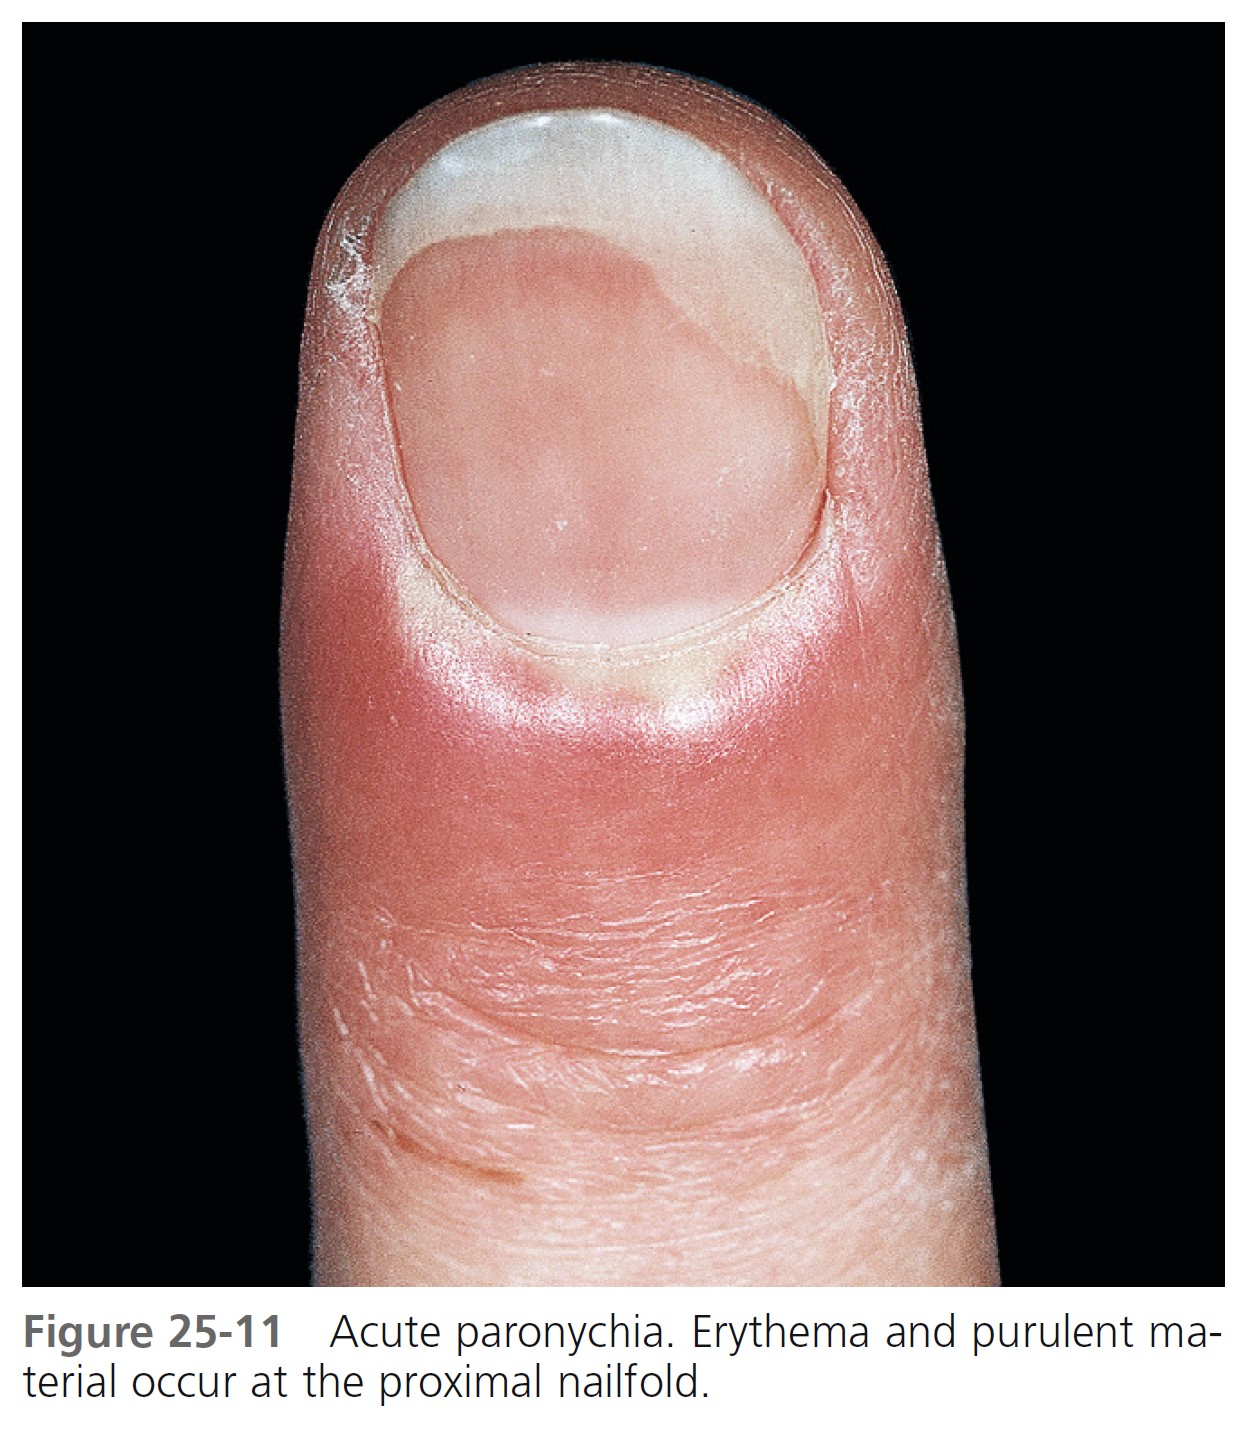 Nail biology and nail science - De Berker - 2007 - International Journal of  Cosmetic Science - Wiley Online Library